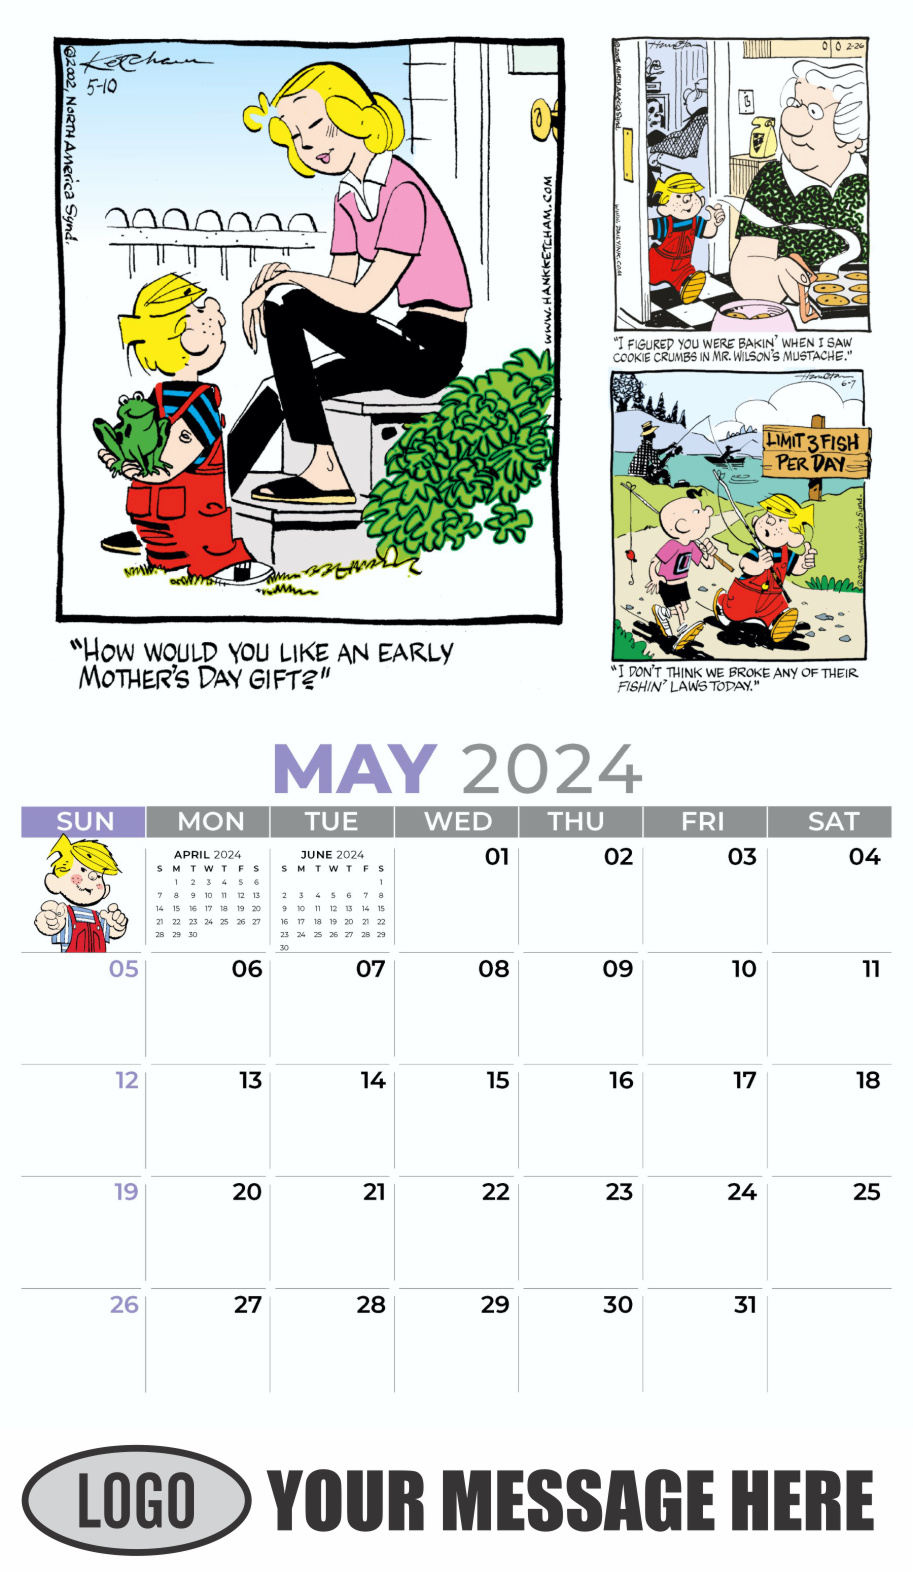 Dennis the Menace 2024 Business Promotional Wall Calendar - May